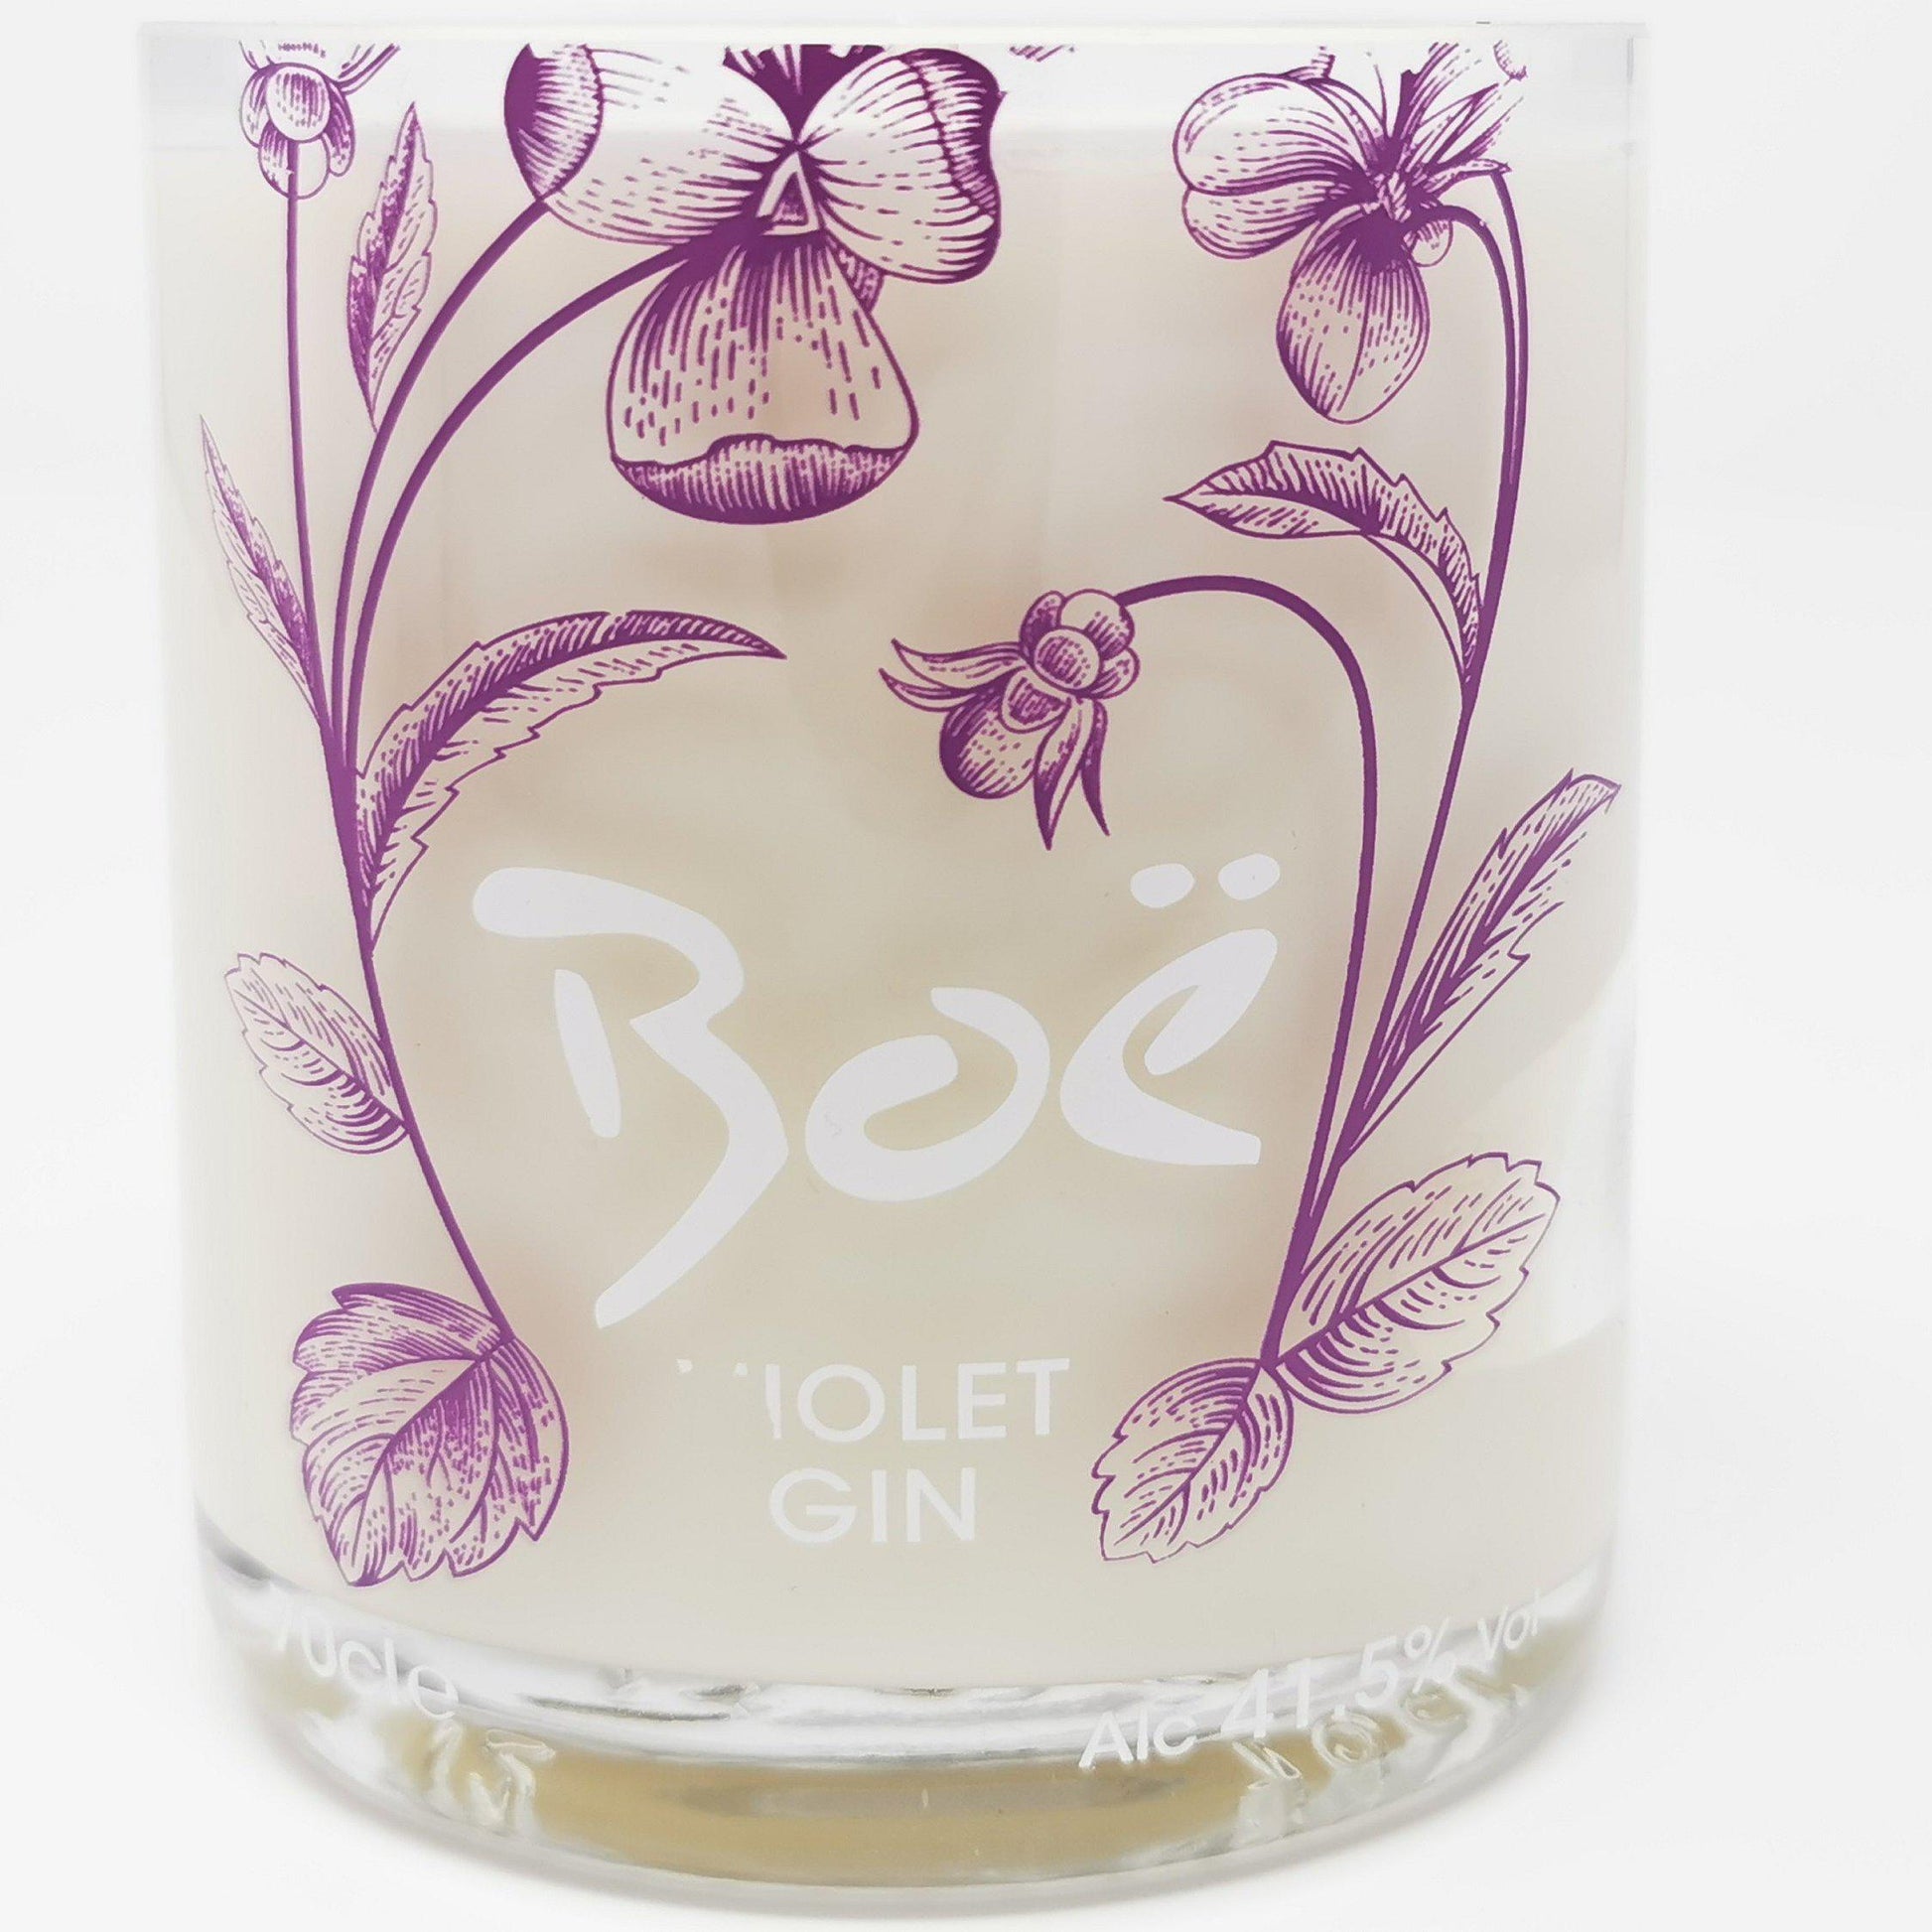 Boe Violet Gin (Small) Bottle Candle Gin Bottle Candles Adhock Homeware